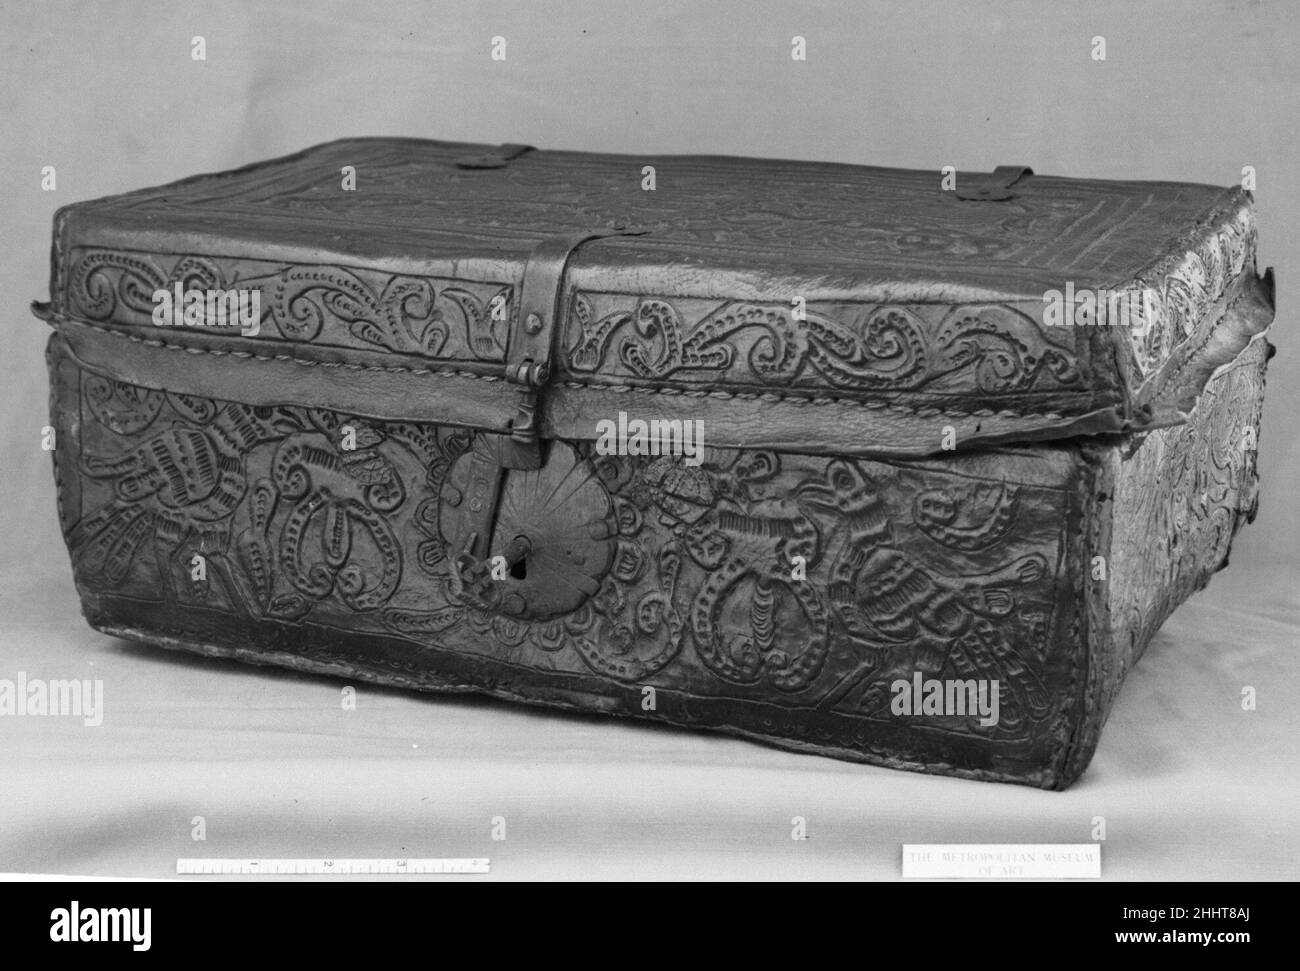 Trunk 17th century Spanish Renowned for their decorative wall hangings, seventeenth-century Spanish leatherworkers also produced utilitarian objects, such as this trunk. The arms, with their winged lion supporters, embossed on the lid are unidentified.. Trunk. Spanish. 17th century. Leather applied to wood, wrought iron. Natural Substances-Leatherwork Stock Photo